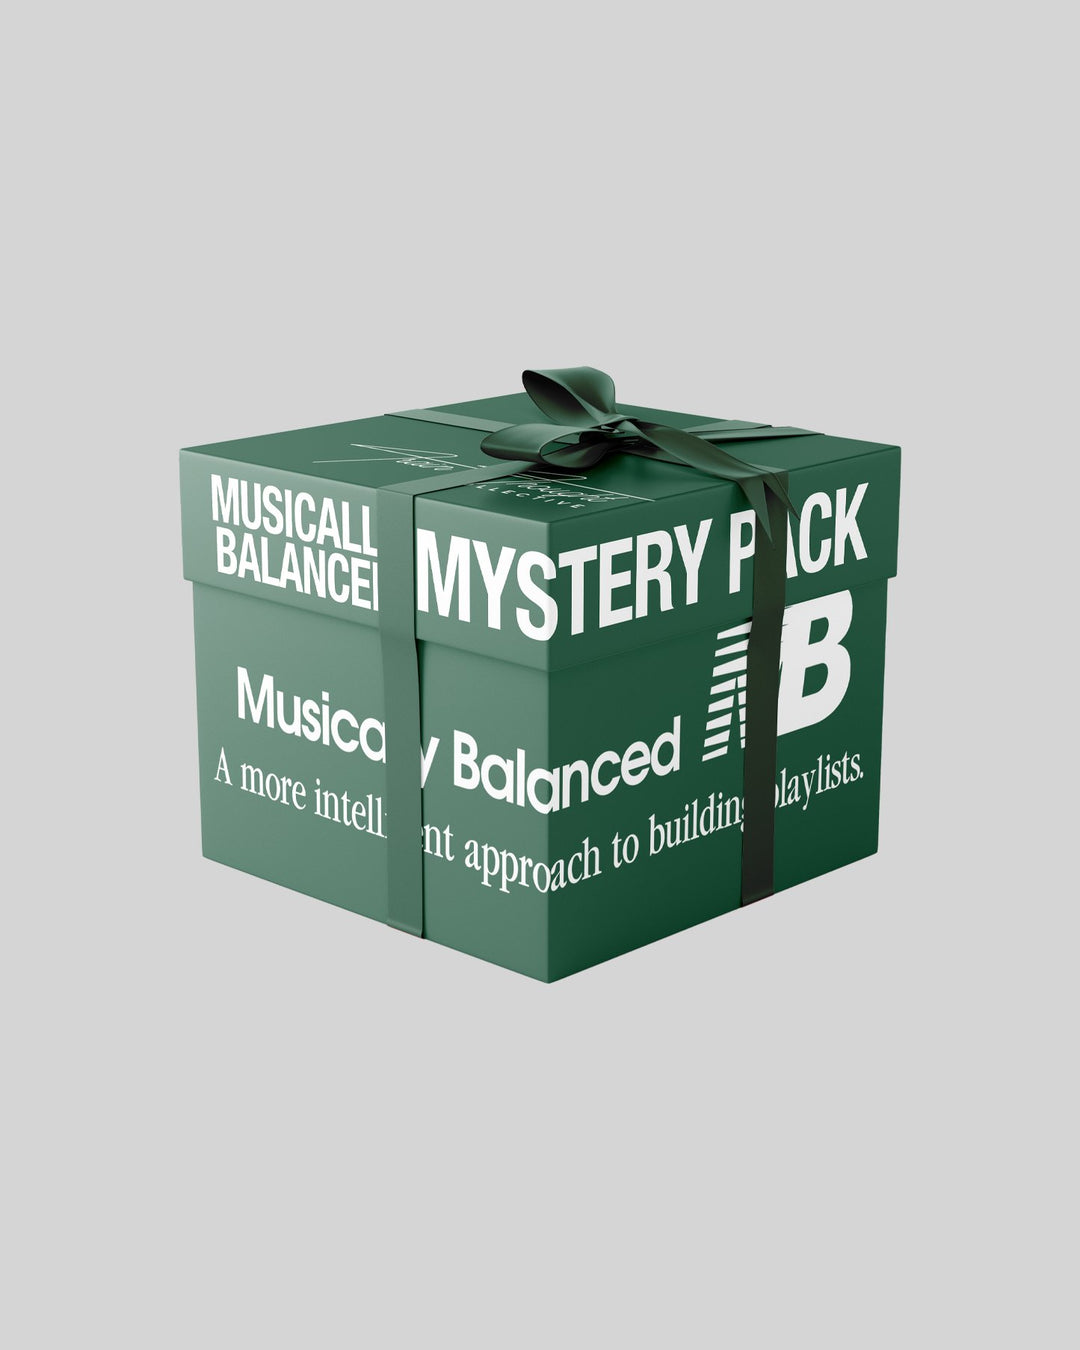 Musically Balanced Mystery Pack - trainofthoughtcollective